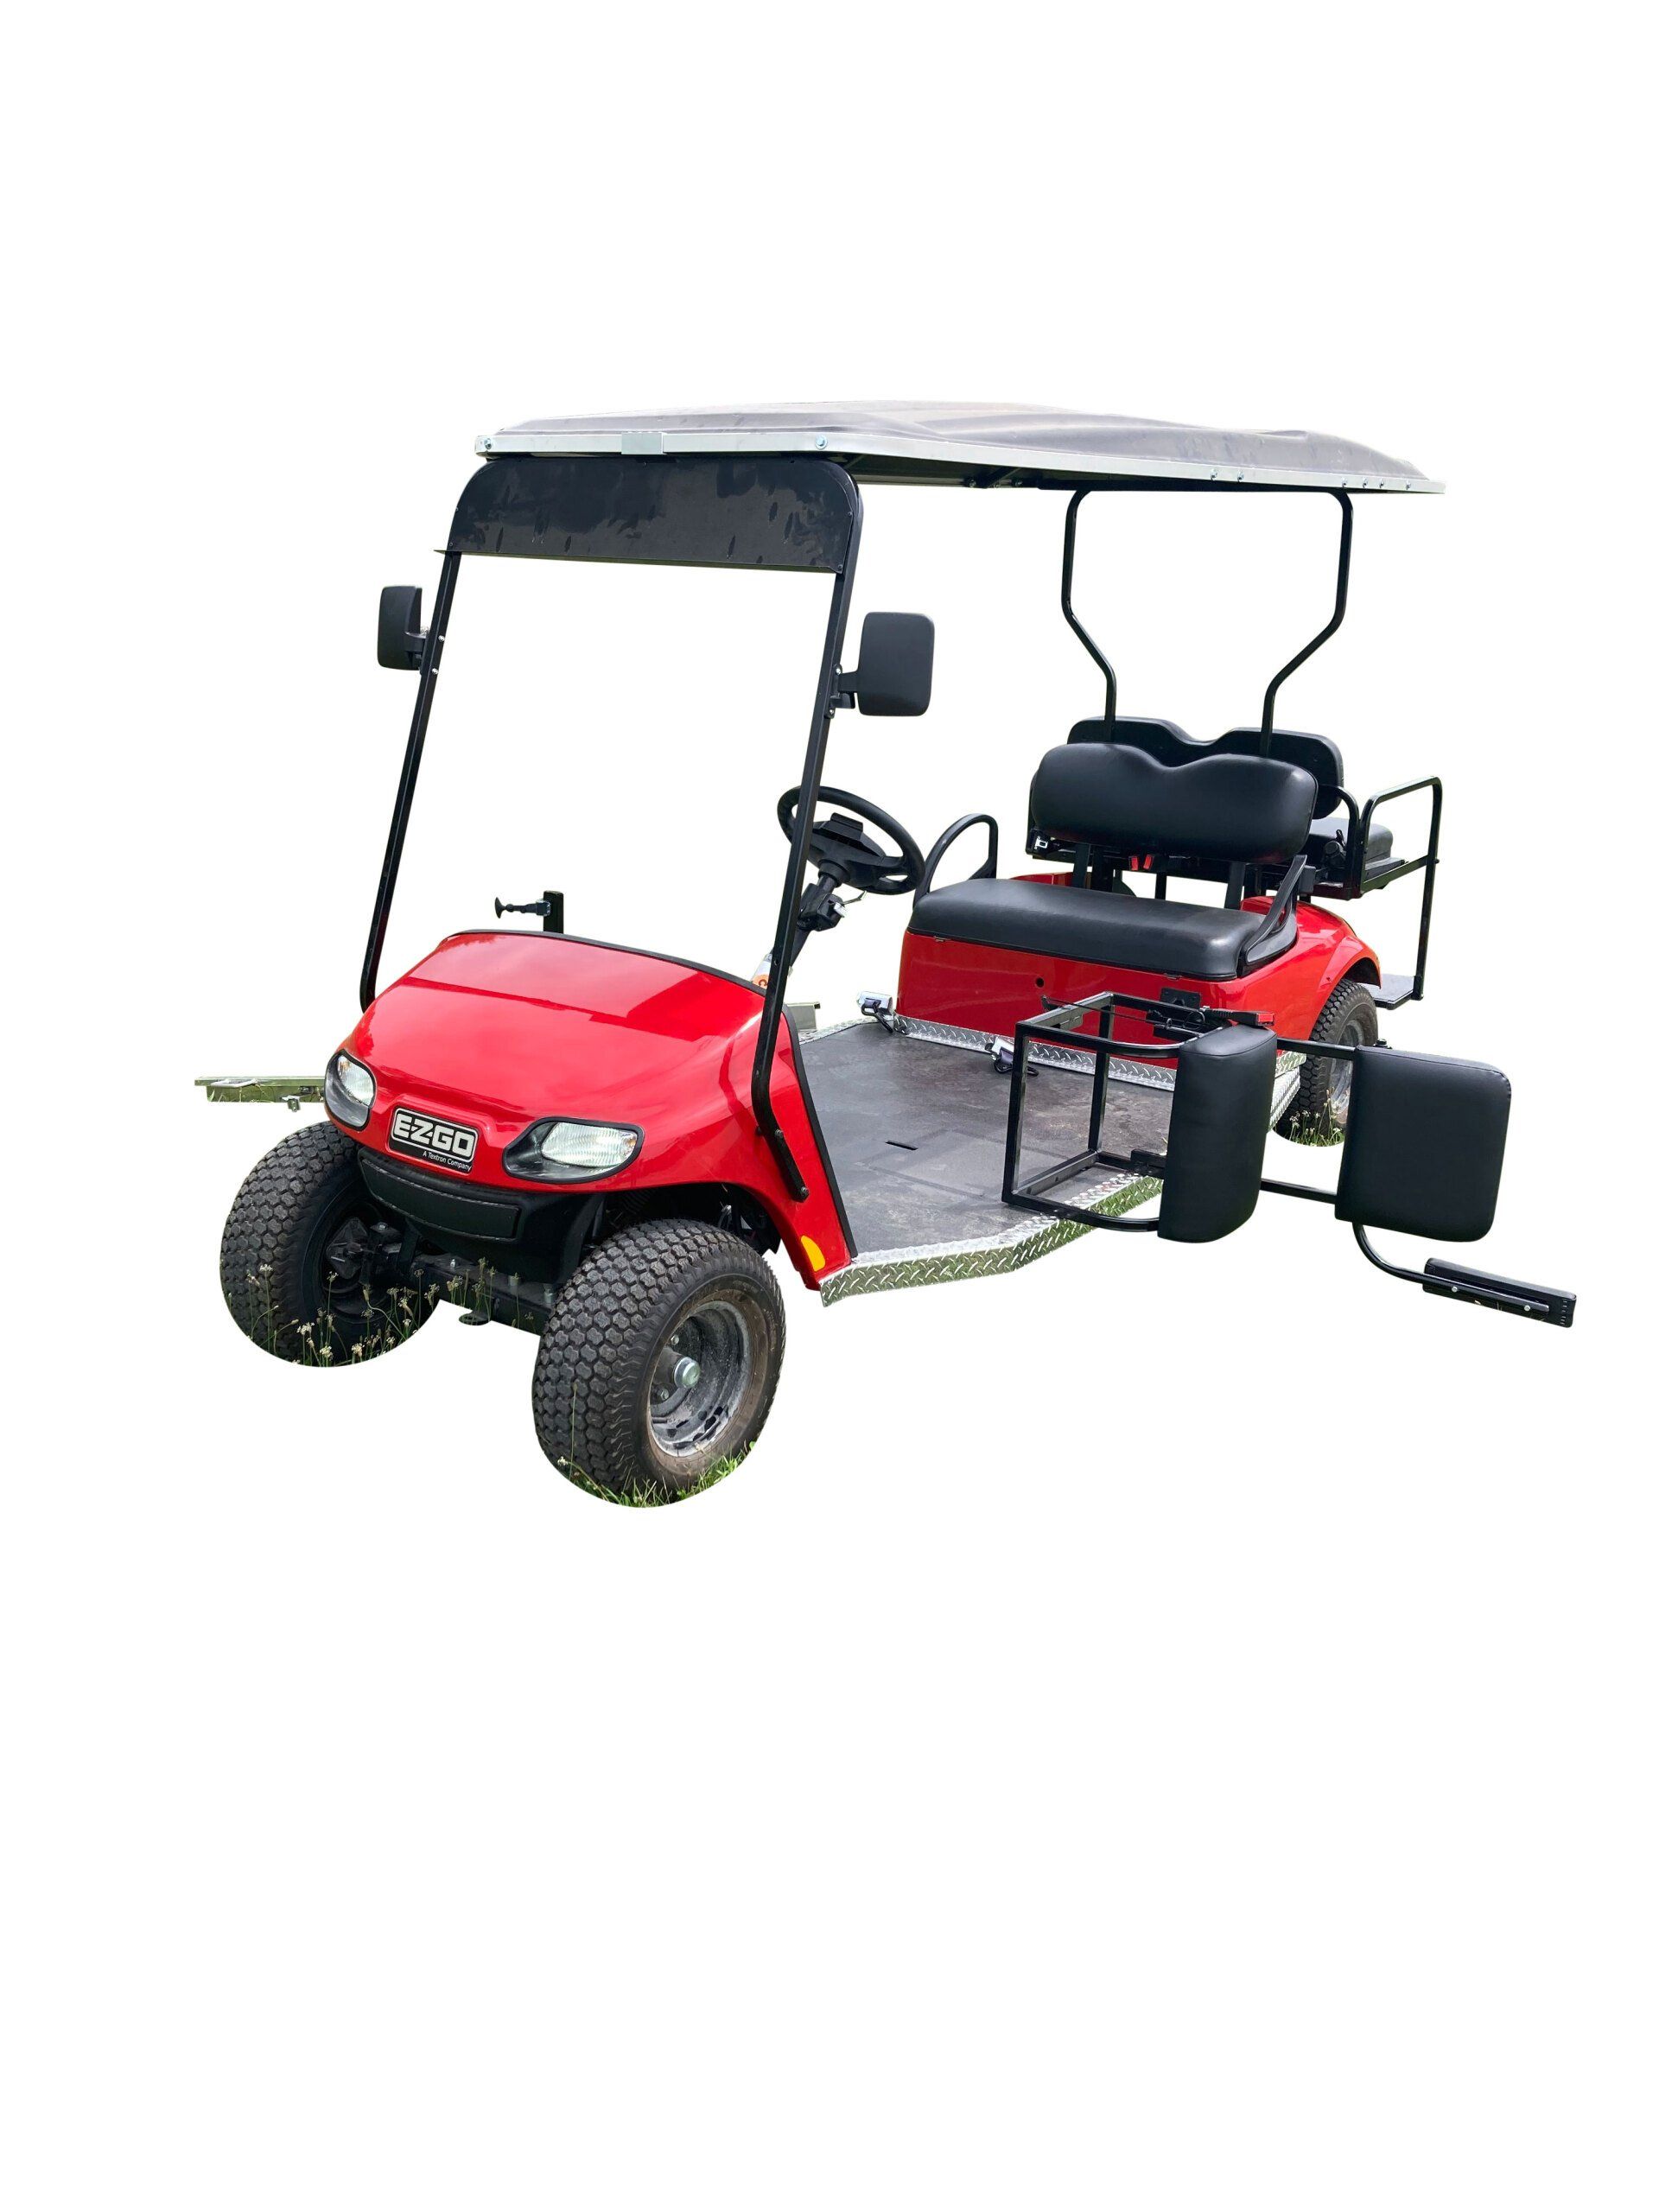 PHED Mobility wheelchair golf cart with the standard fold out driver seat - red